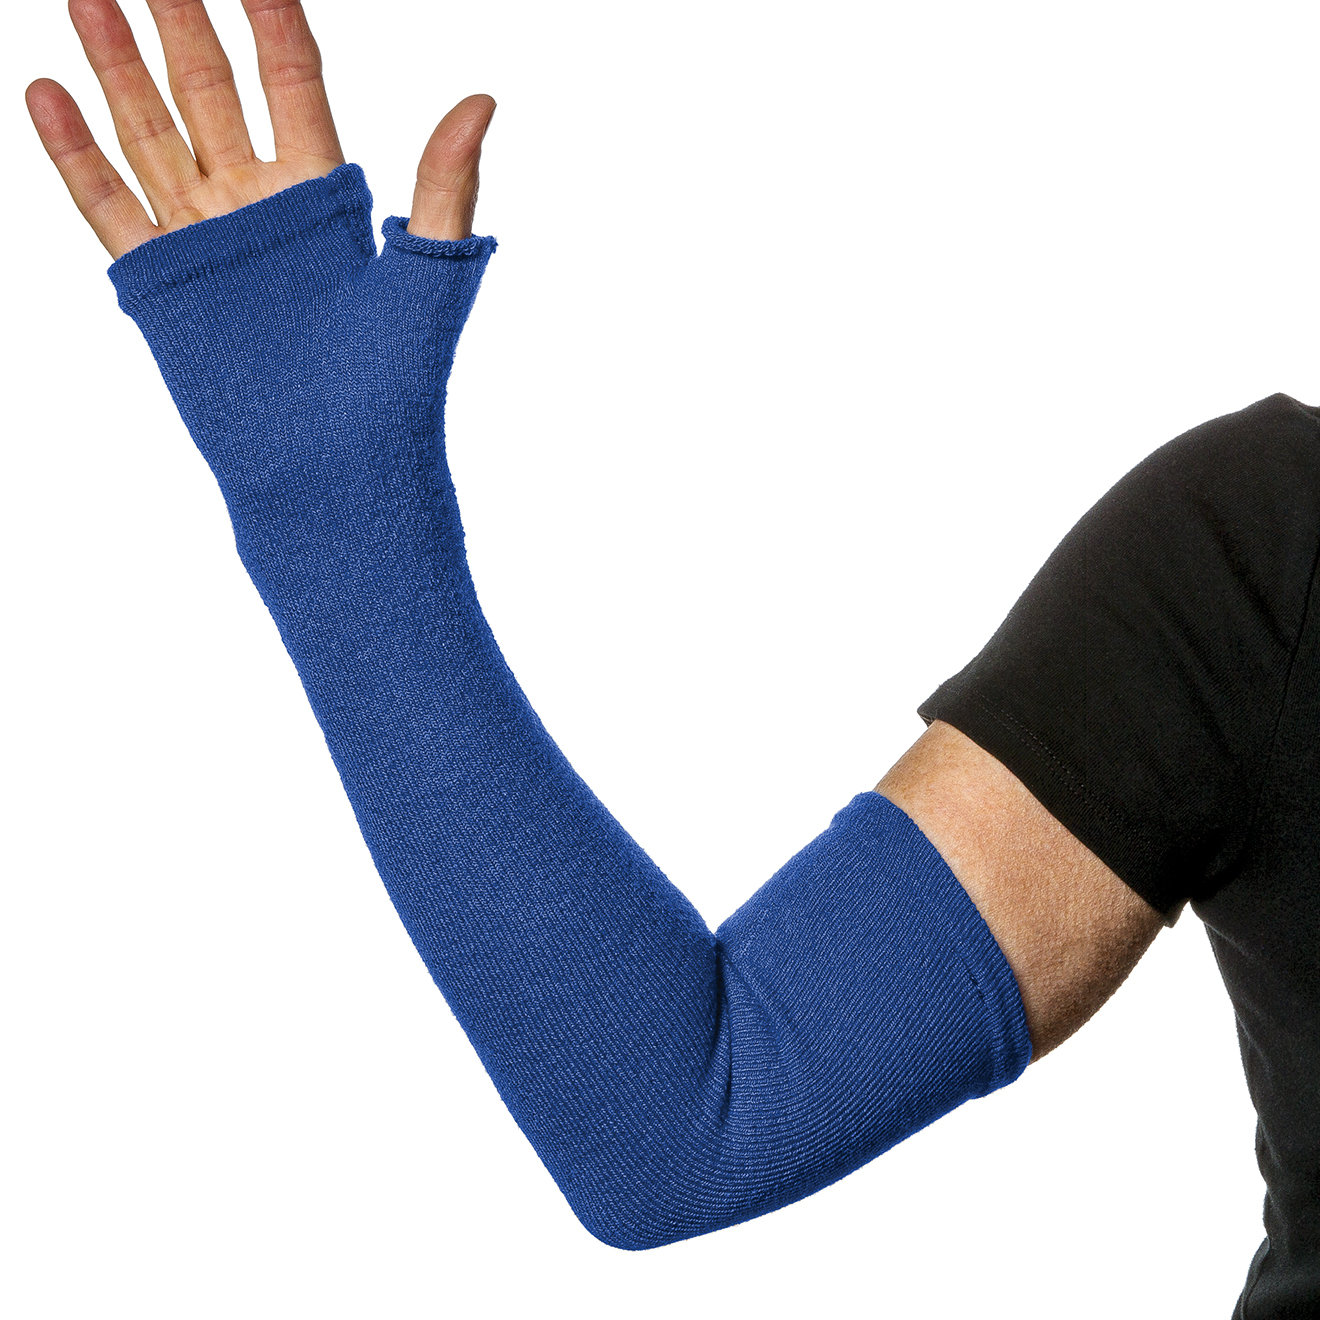 UPF 50+ Sun Protection Weak Frail or Fragile skin protection with Long Fingerless Gloves - Medium Weight. Weak skin protection. (Pair)